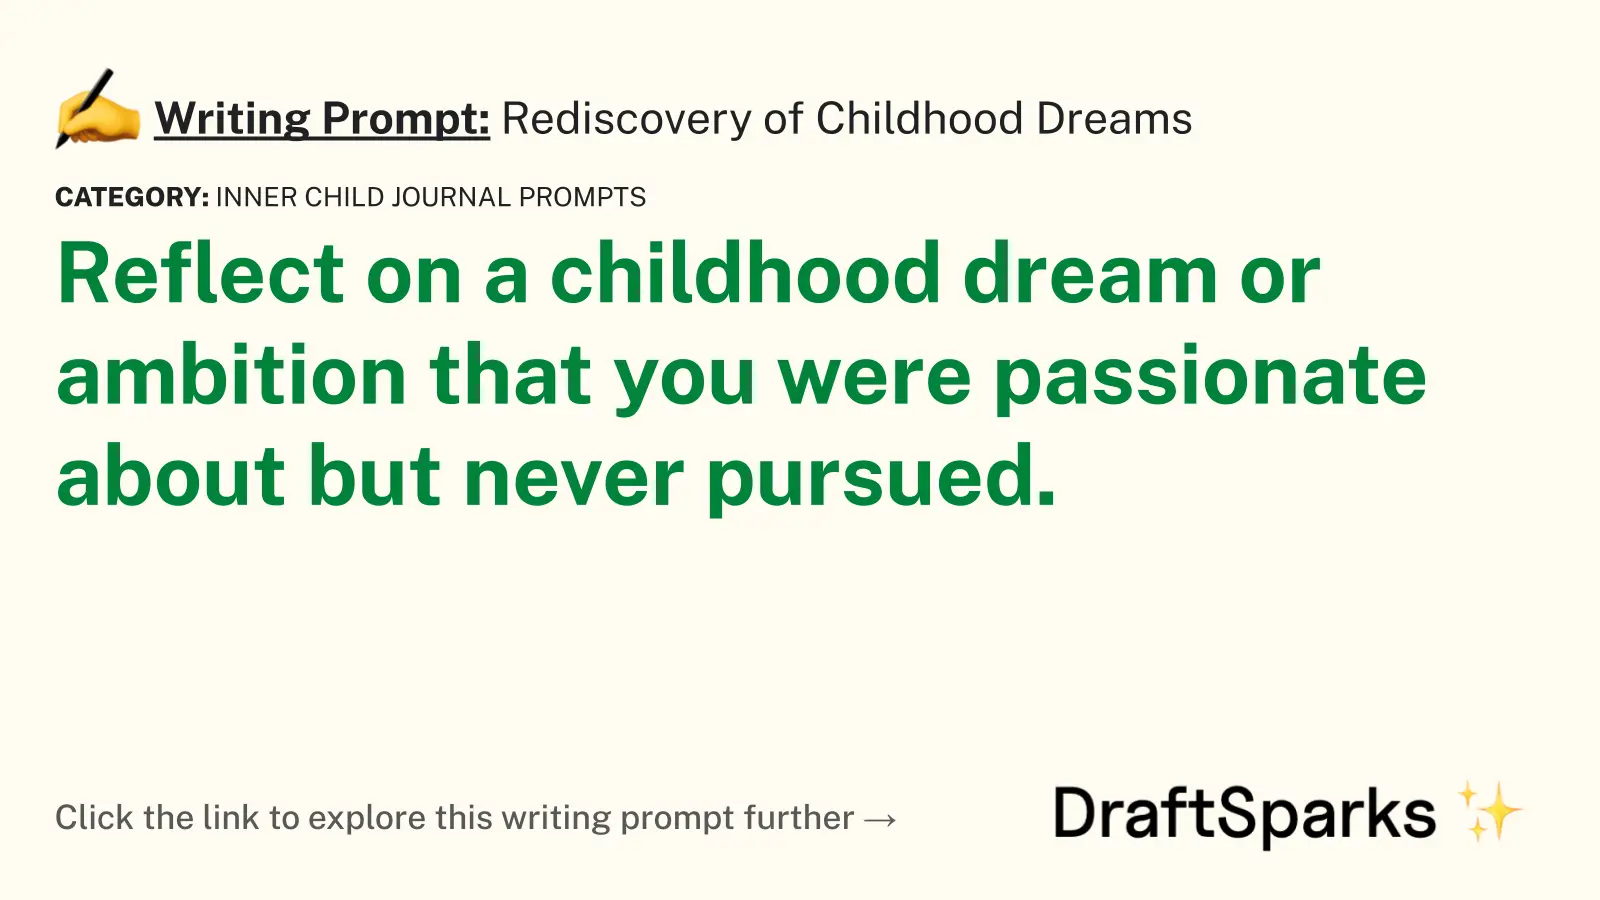 Rediscovery of Childhood Dreams